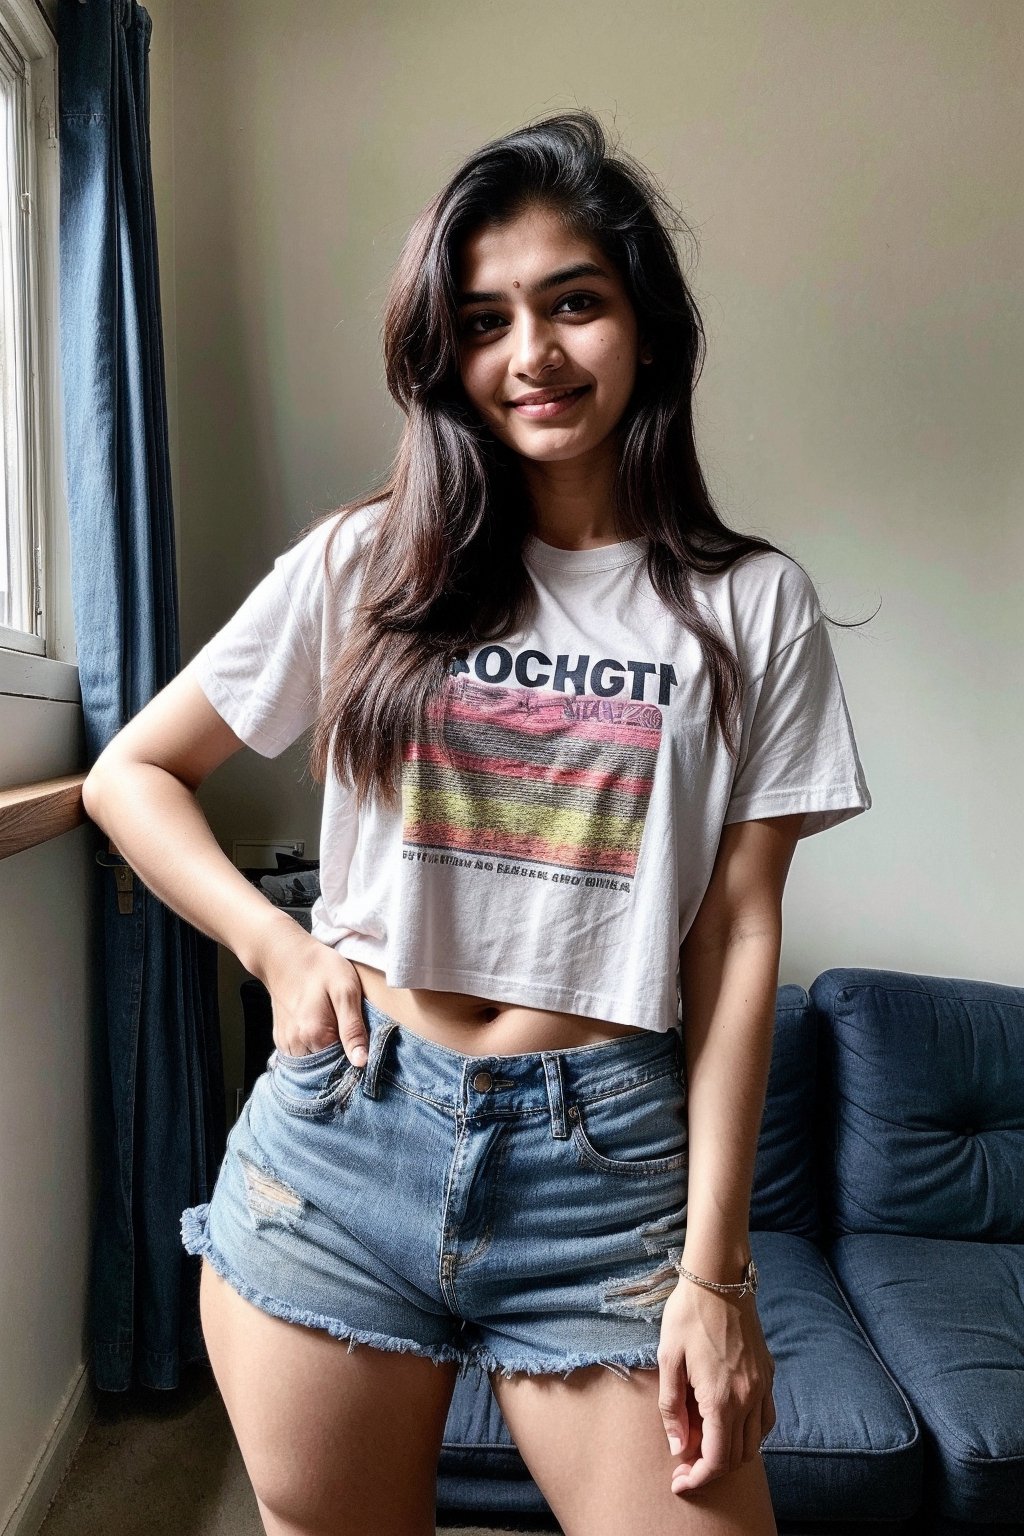 beautiful cute young attractive indian teenage girl, 18 years old, cute,  Instagram model, long black_hair, colorful hair, warm, at home, indian,  full body, tshirt, denim shorts

